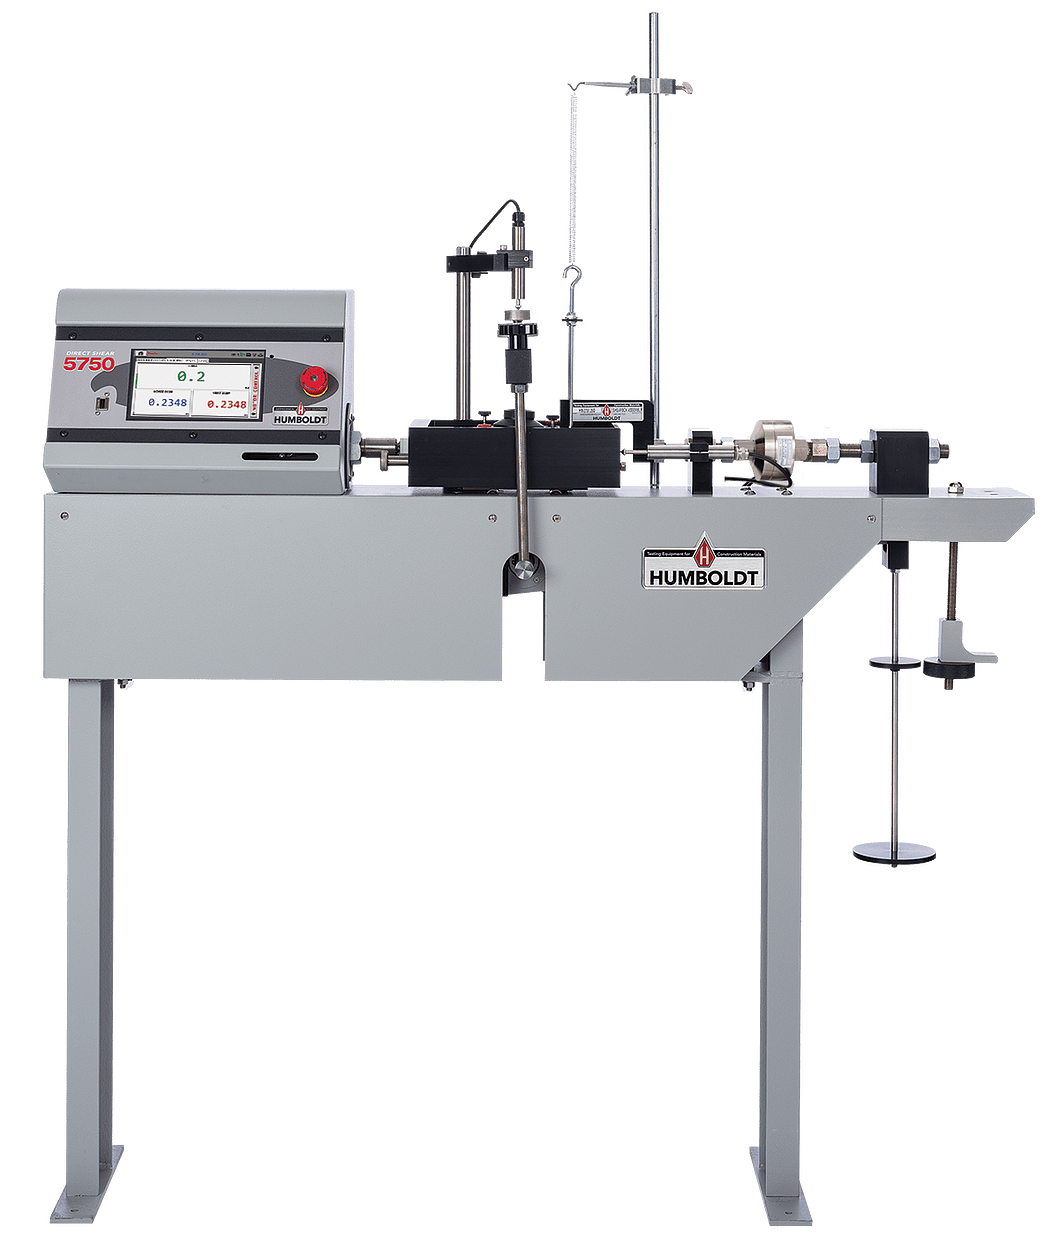 Dead-Weight Direct Residual Shear Machines